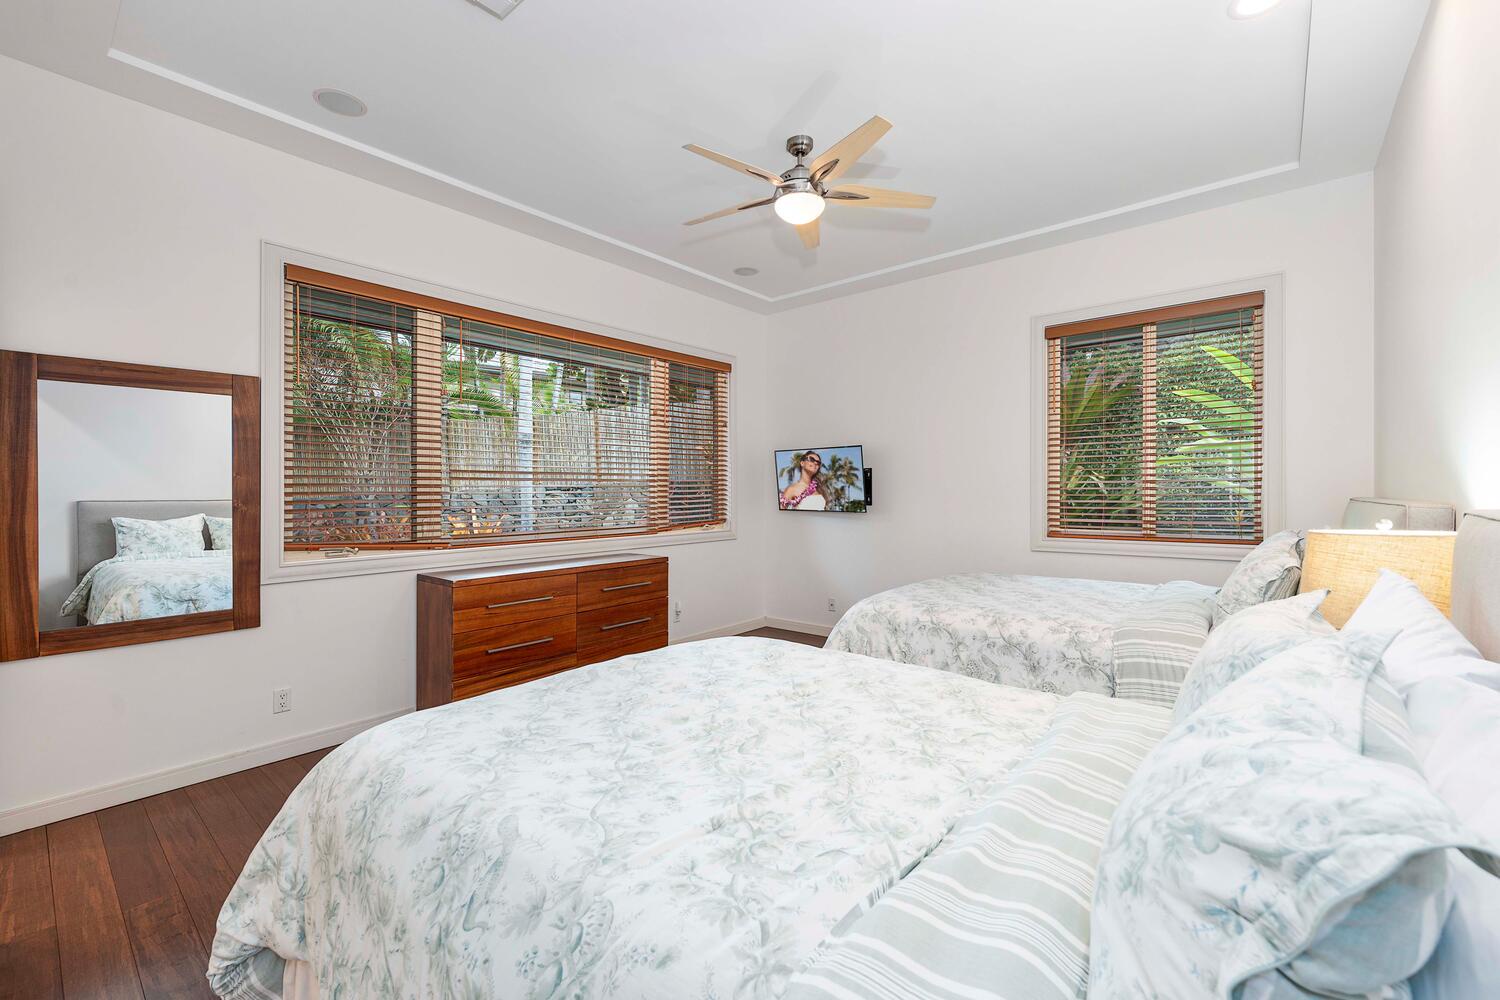 Kailua Kona Vacation Rentals, Blue Hawaii - Guest bedroom with attached ensuite